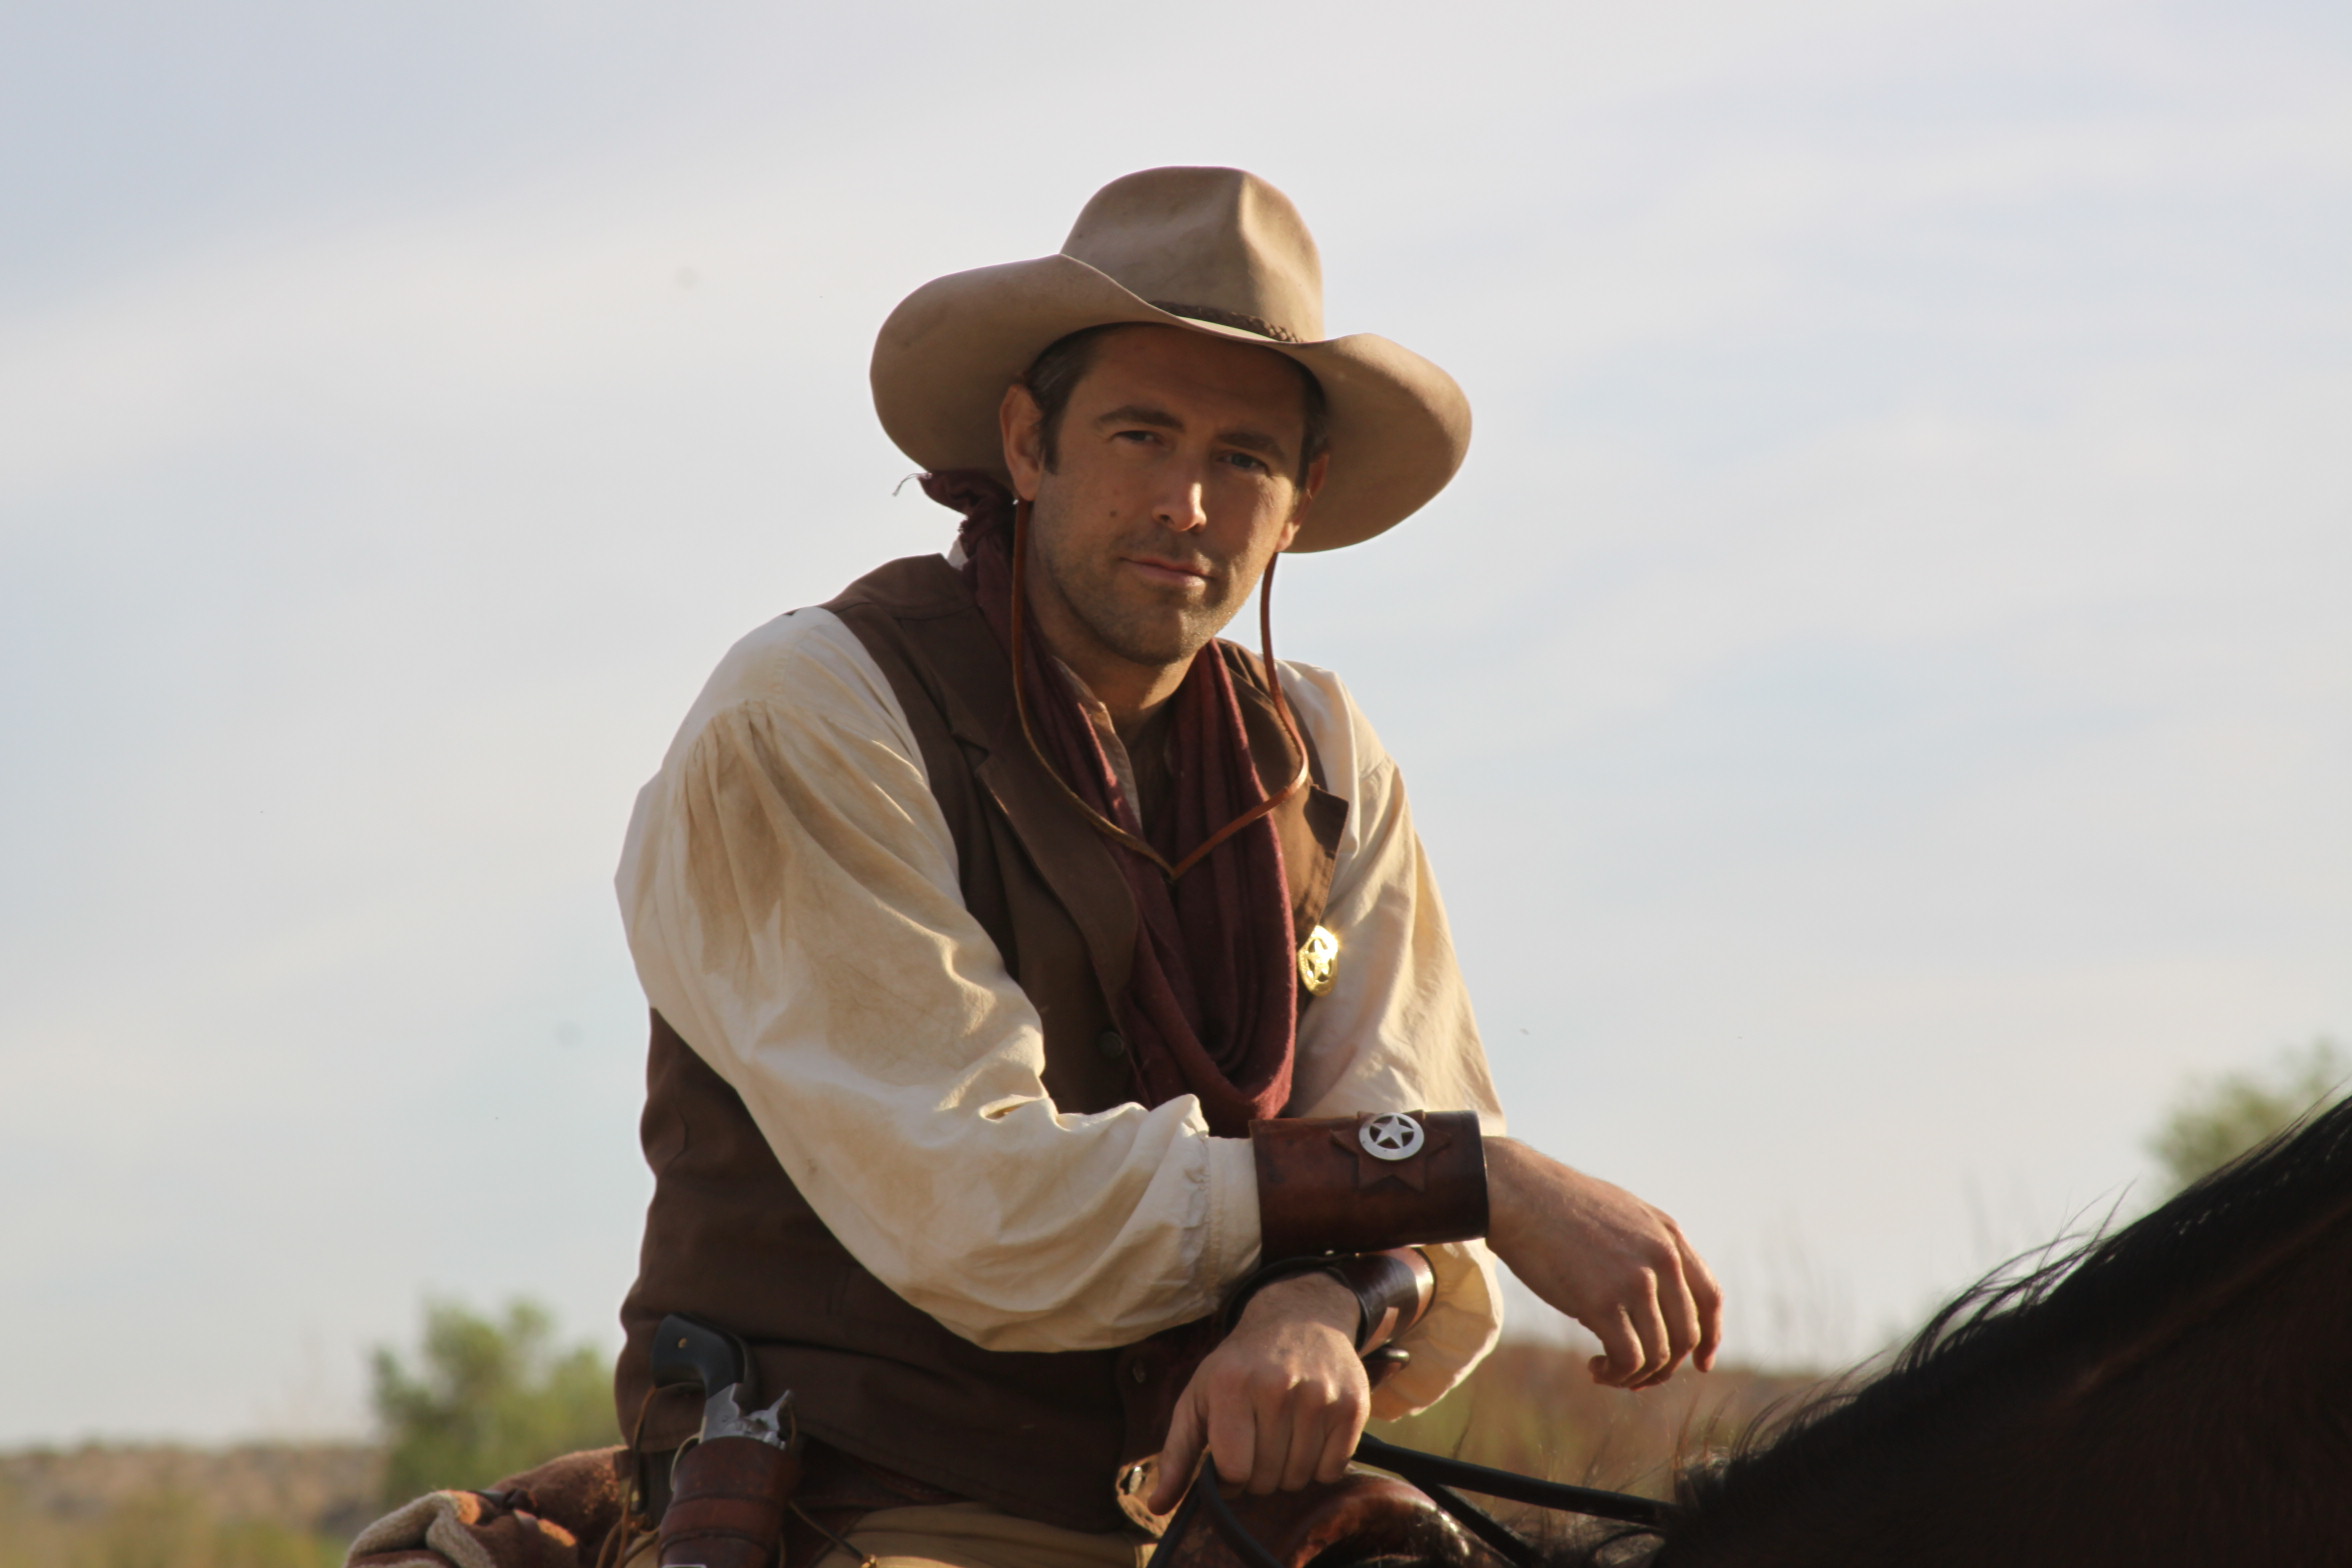 Brock Morse as Texas Ranger Tian McCaine, on location for Tales of the Frontier.